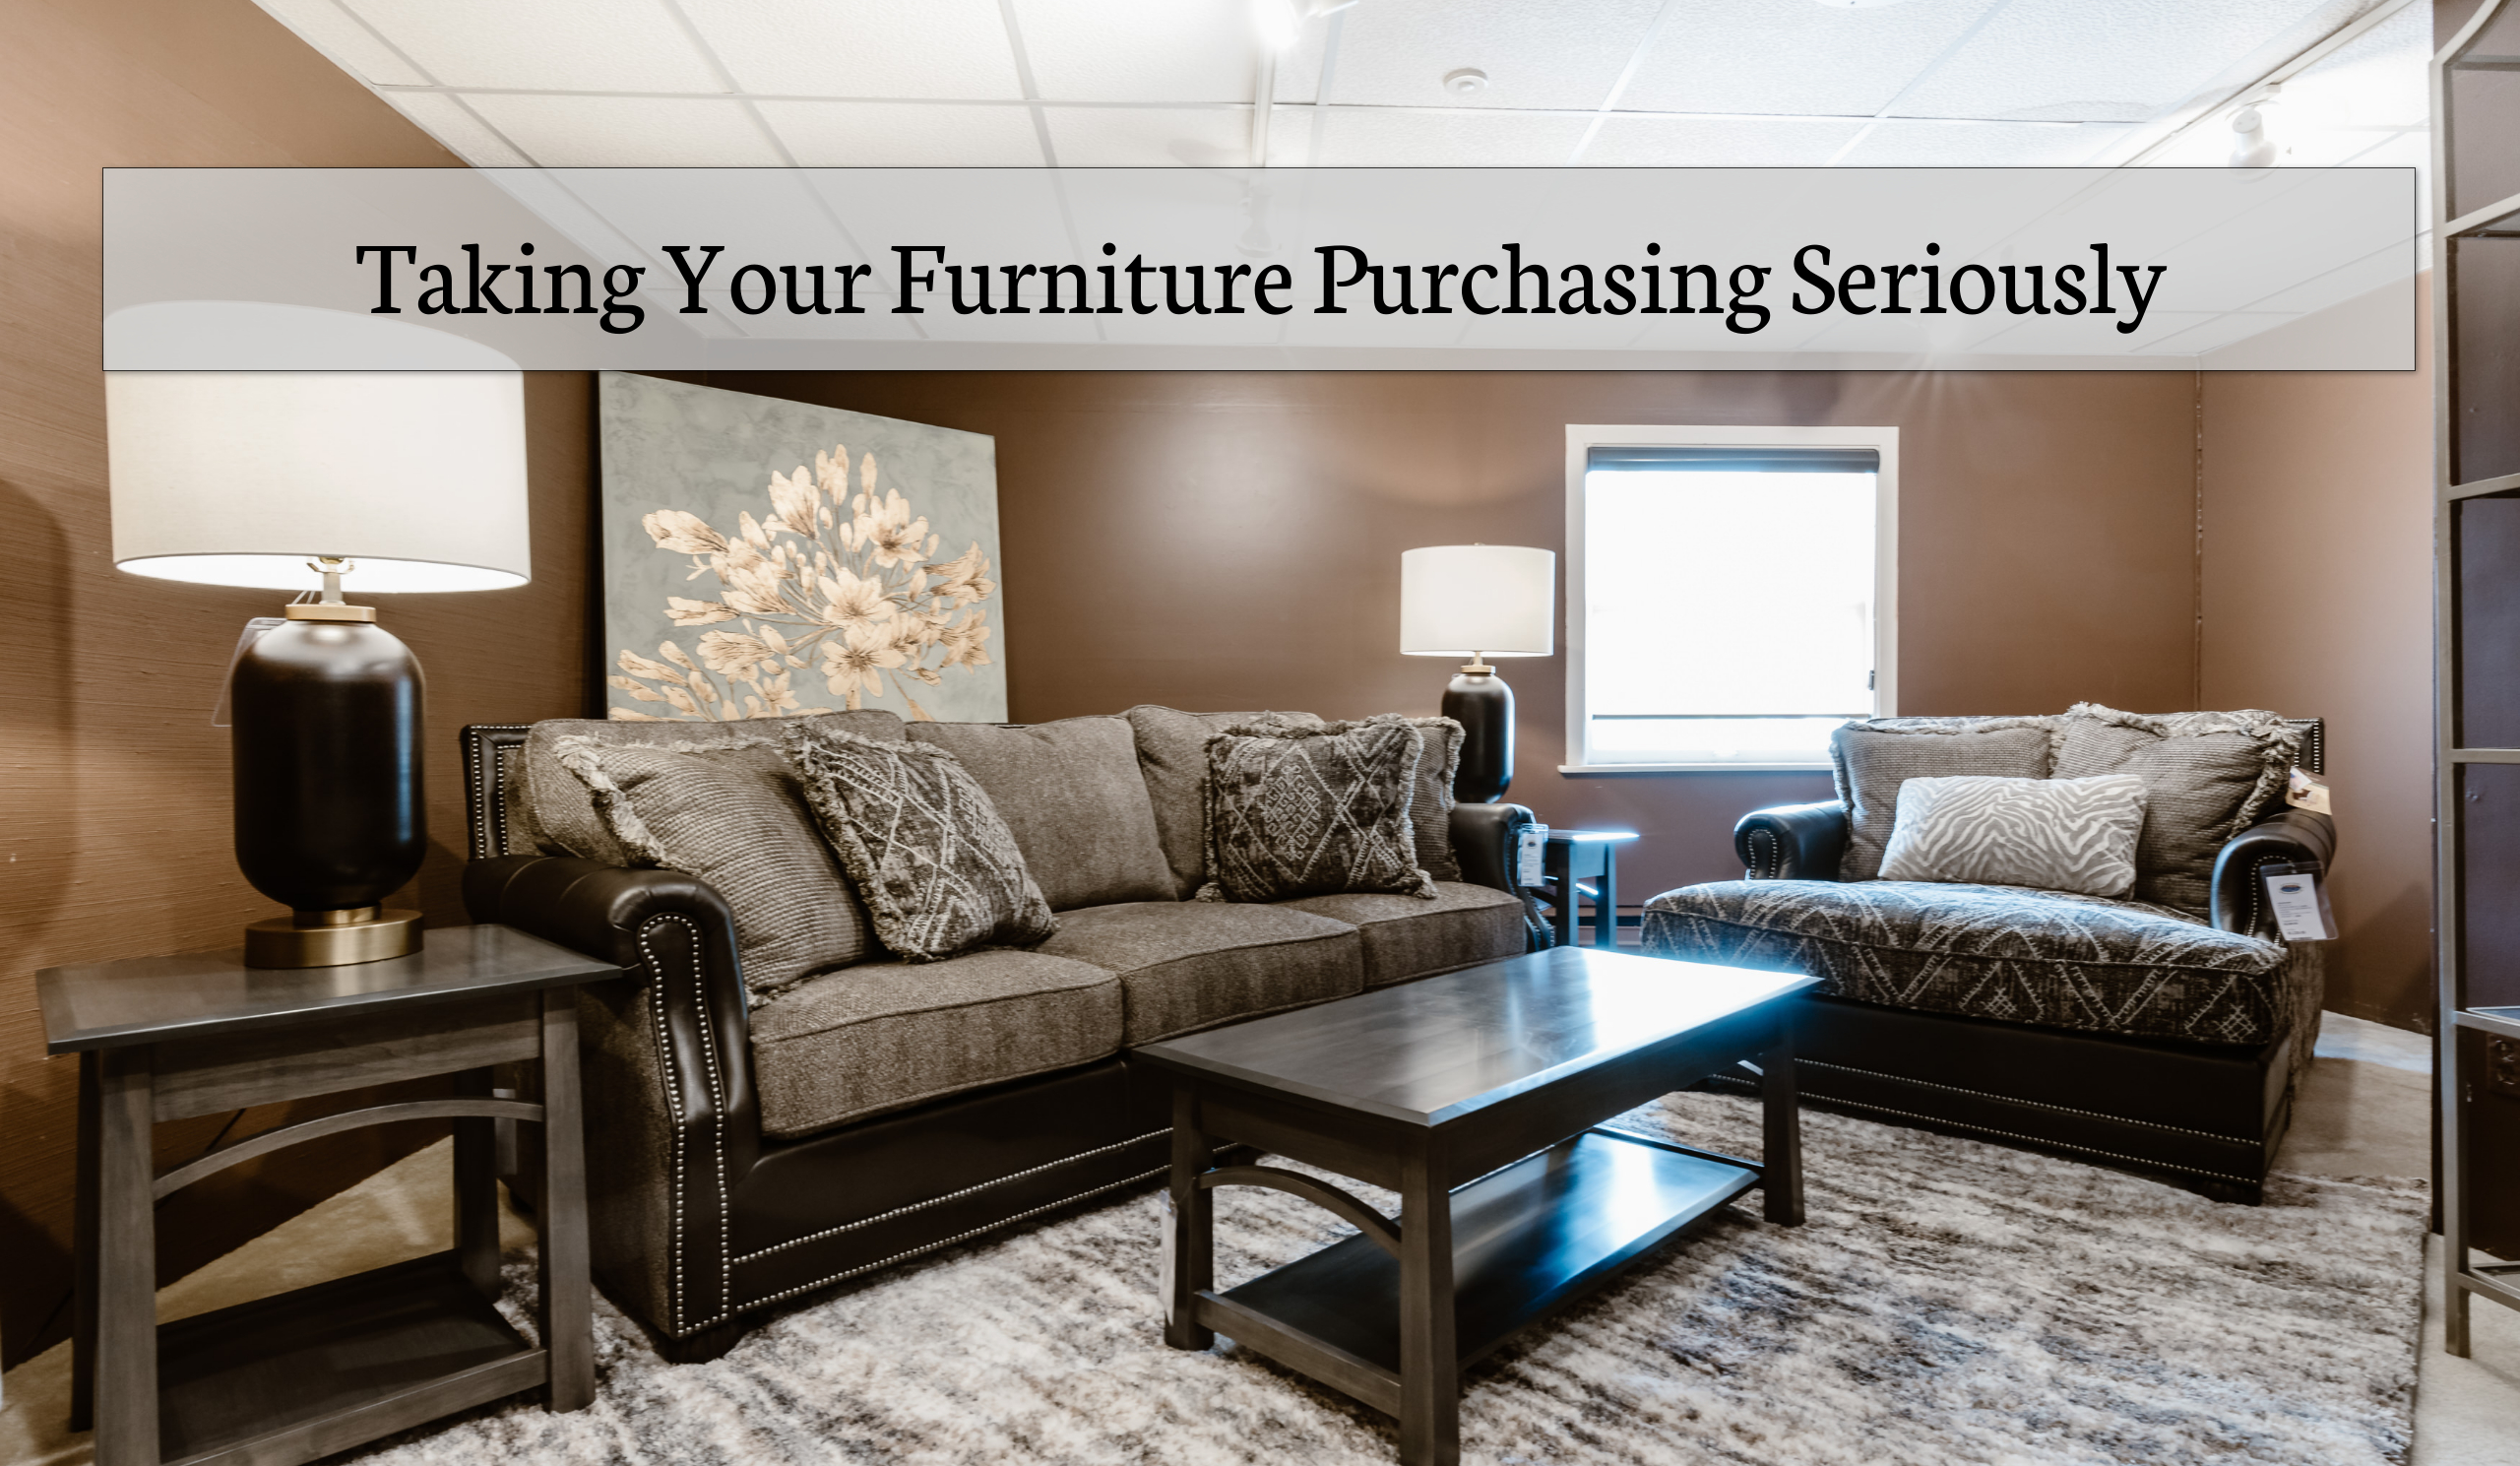 Why You Need To Take Your Furniture Purchase Seriously – Feb. 2021 R1-Max-Quality